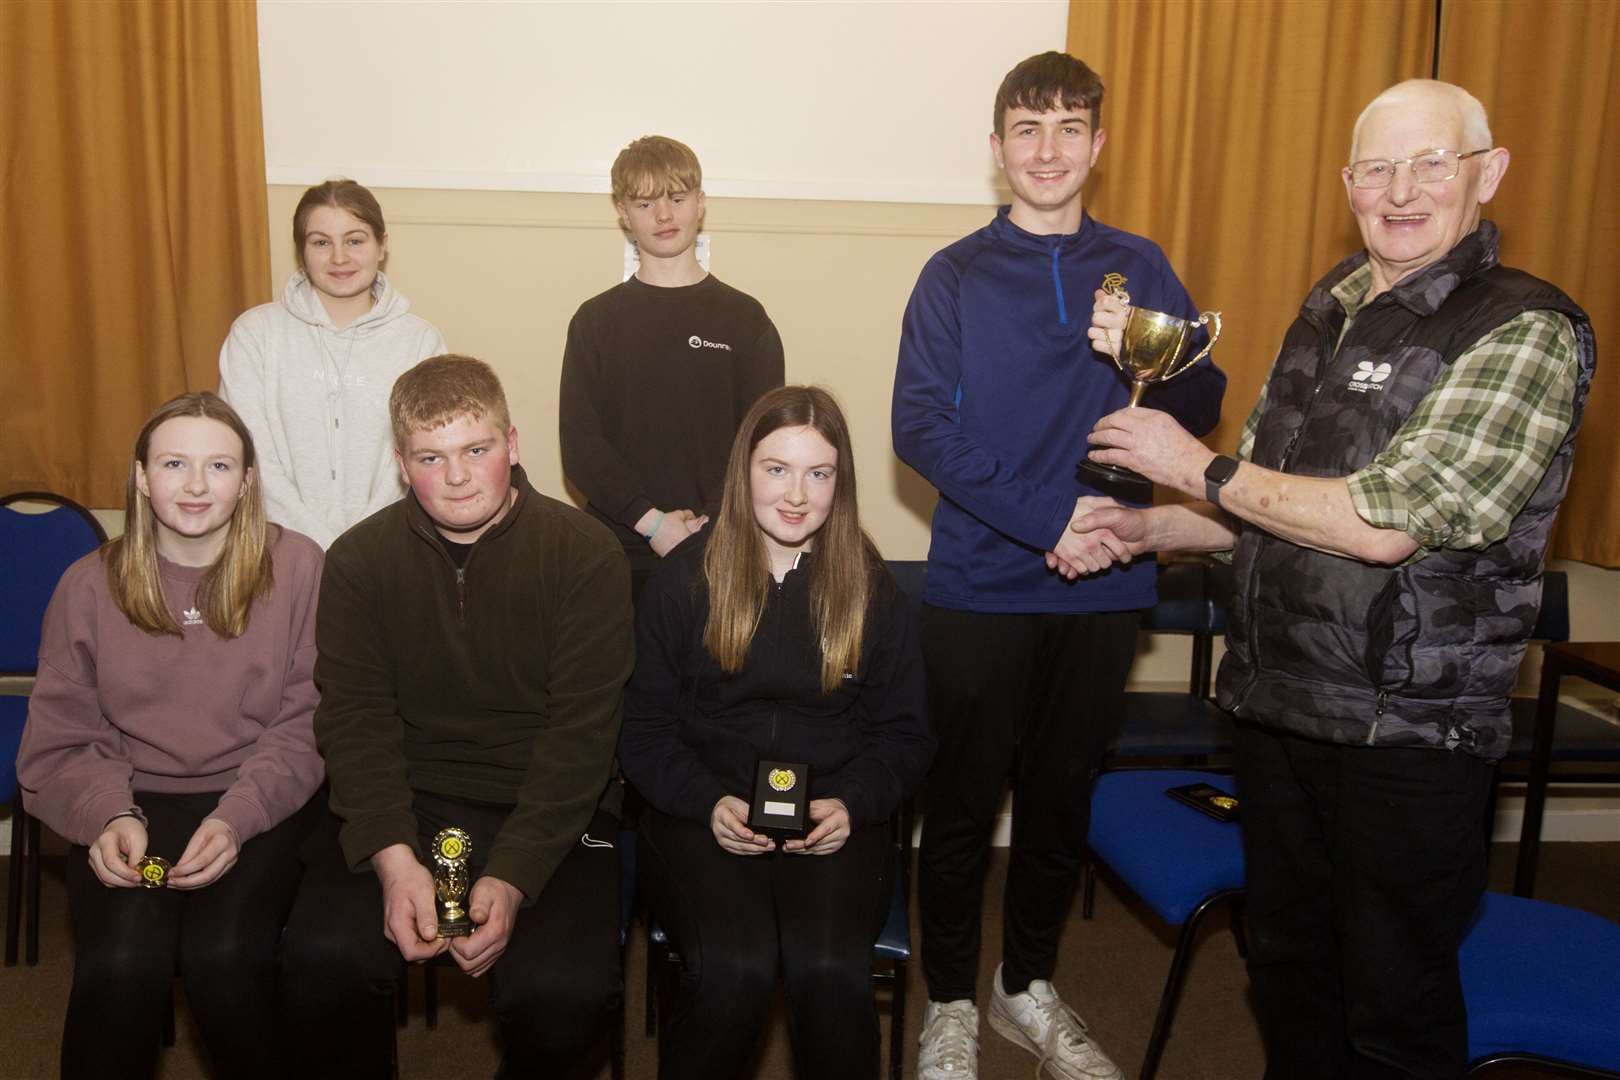 Ross Sutherland of Halkirk won Caithness Small Bore Rifle Association's annual indoor junior championship, held in Lieurary hall. Ross, pictured receiving his trophy from Jim Manson (right), scored 287 points, one more than his clubmate Sophie Campbell (front, right), who was runner-up on 286 points. Looking on are other junior shooters who took part in the championship. Front (from left): Grace Campbell, Halkirk; Luke Taylor, Westfield, who also won the Division Two junior league; (back) Iona Simpson, Wick Old Stagers; and John Bremner, Halkirk. Picture: Robert MacDonald / Northern Studios